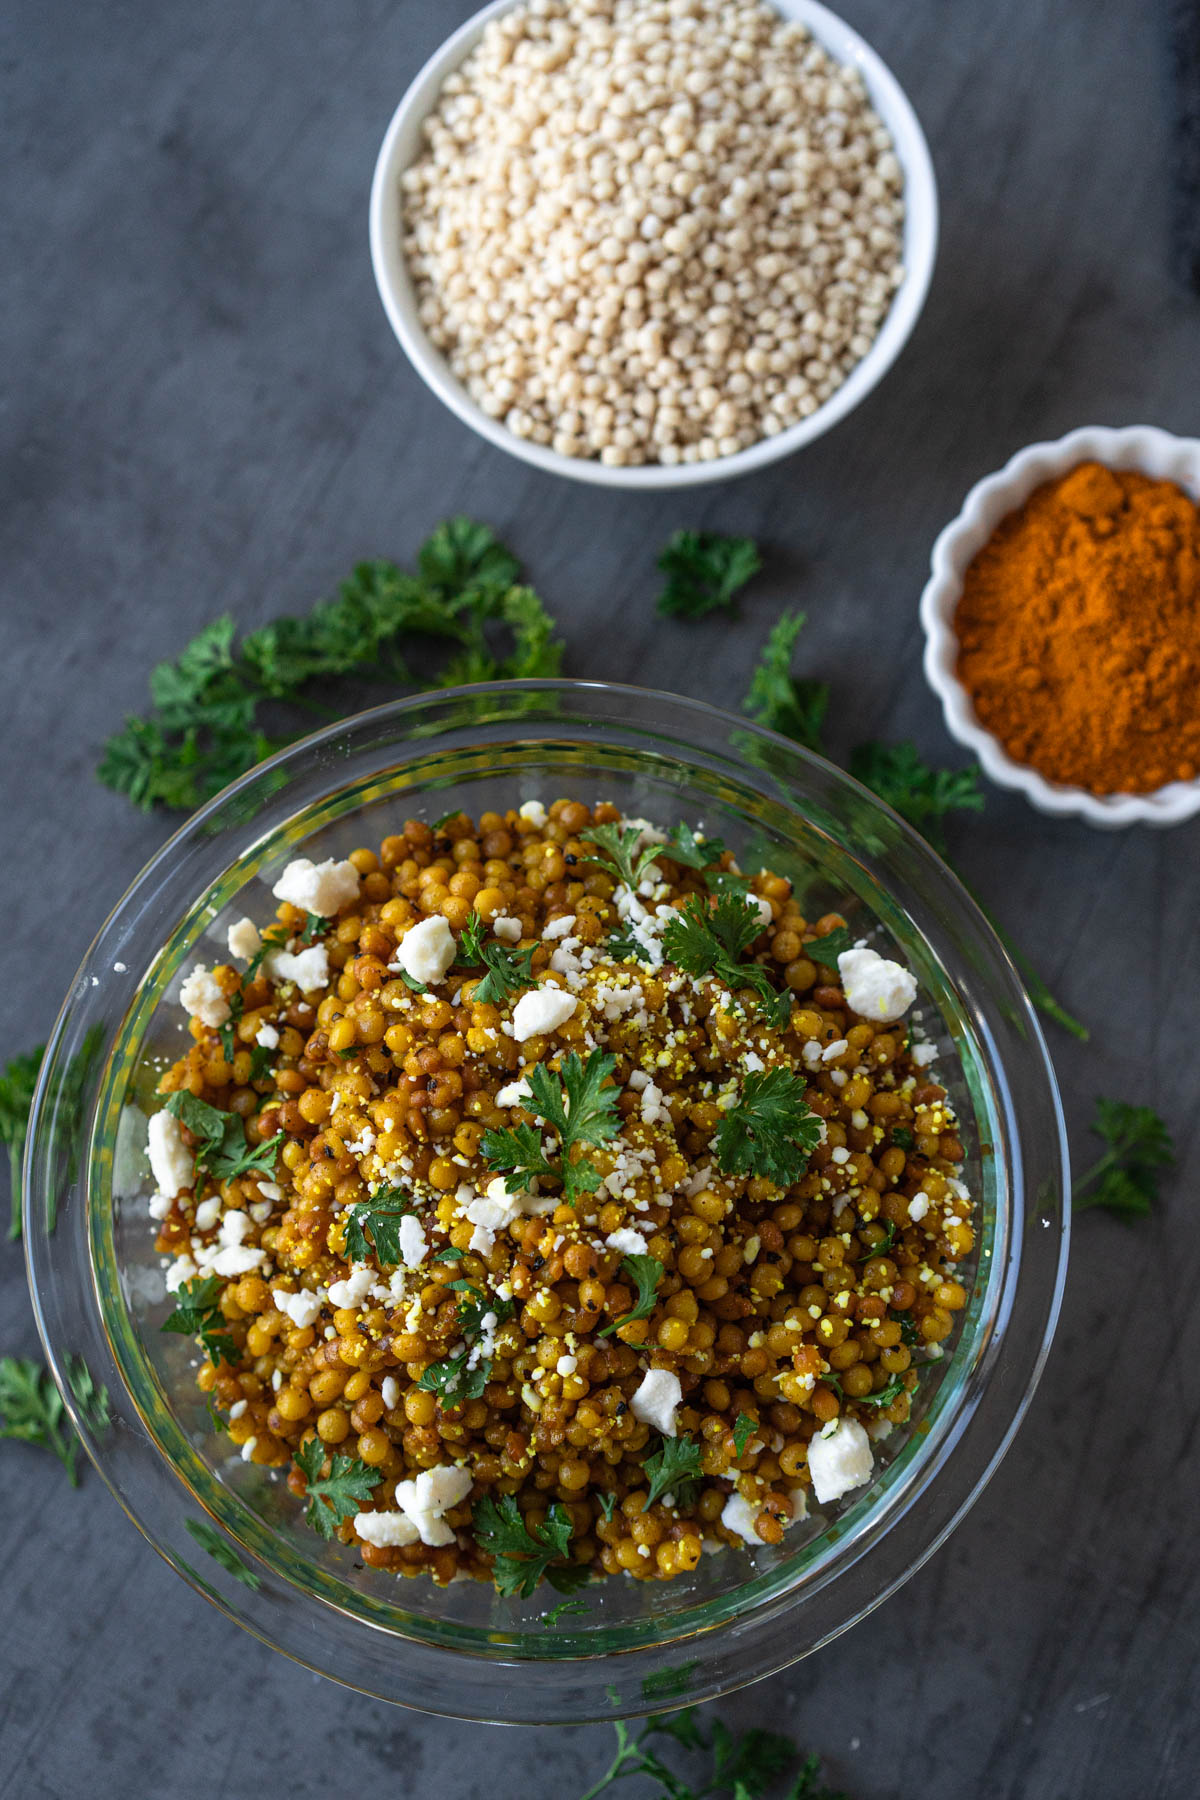 Clear bowl filled with golden couscous, garnished with fresh parsley and crumbled feta. The bowl is on a gray surface that has fresh parsley scattered across it. Blurred in the background are two bowls – one with ground turmeric and the other with dry couscous